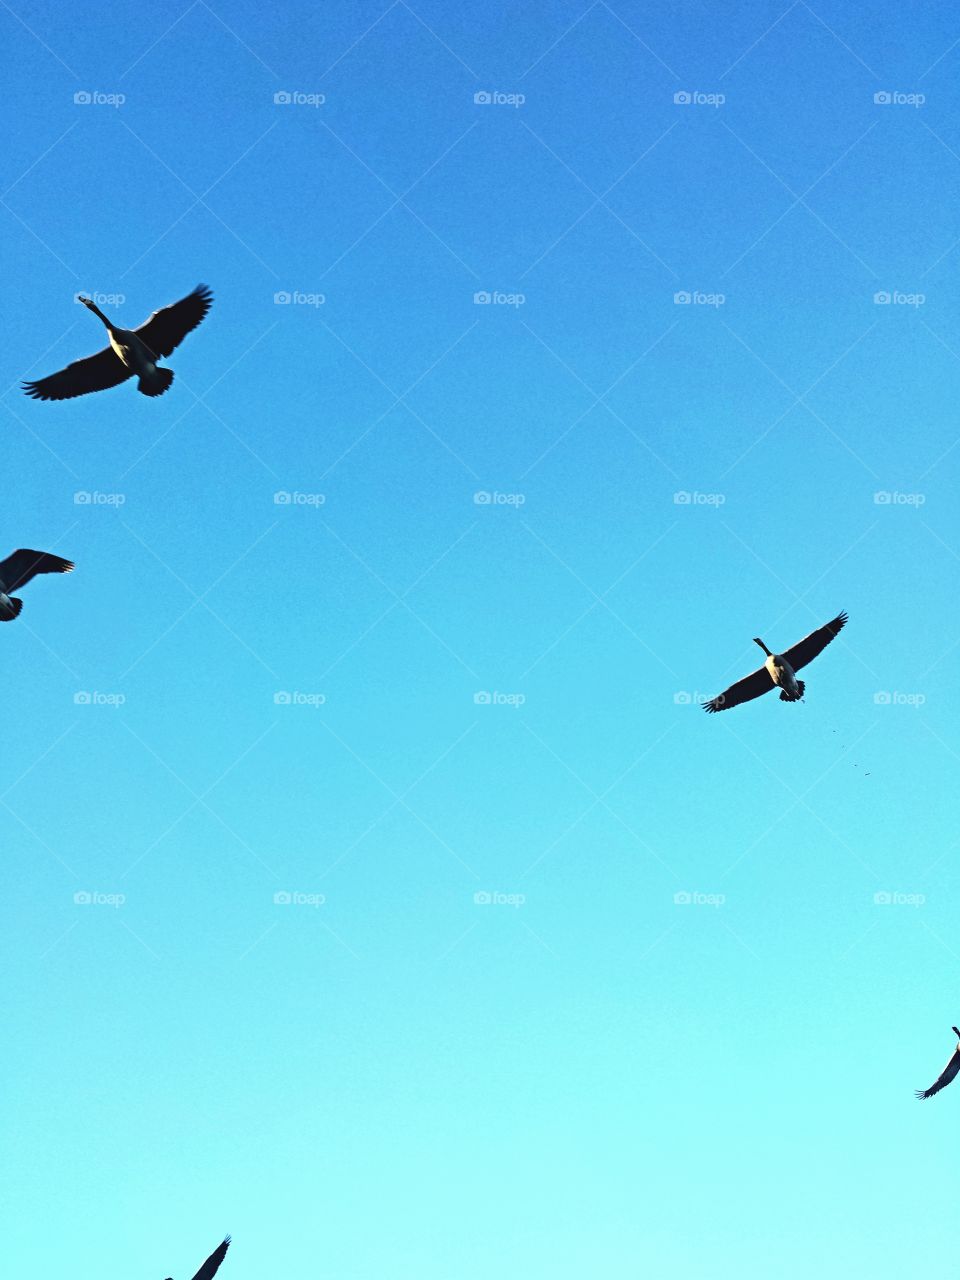 Canadian Geese Fly Over